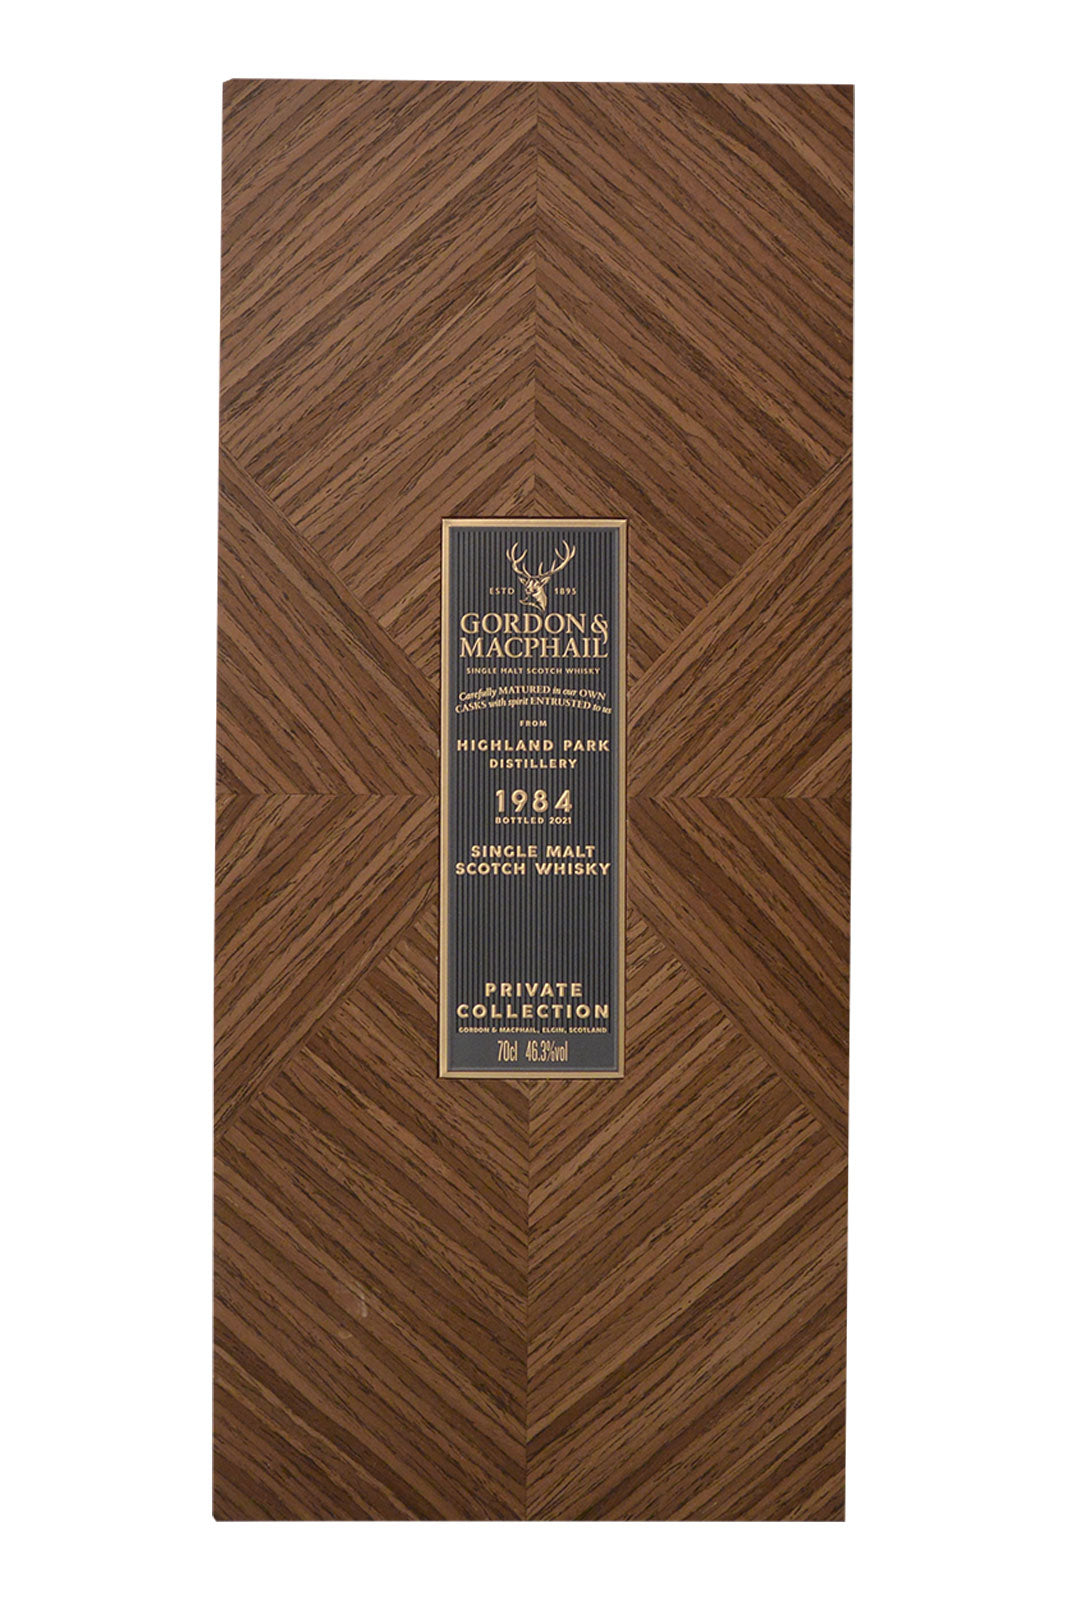 Highland Park 1984 Gordon & MacPhail Private Collection